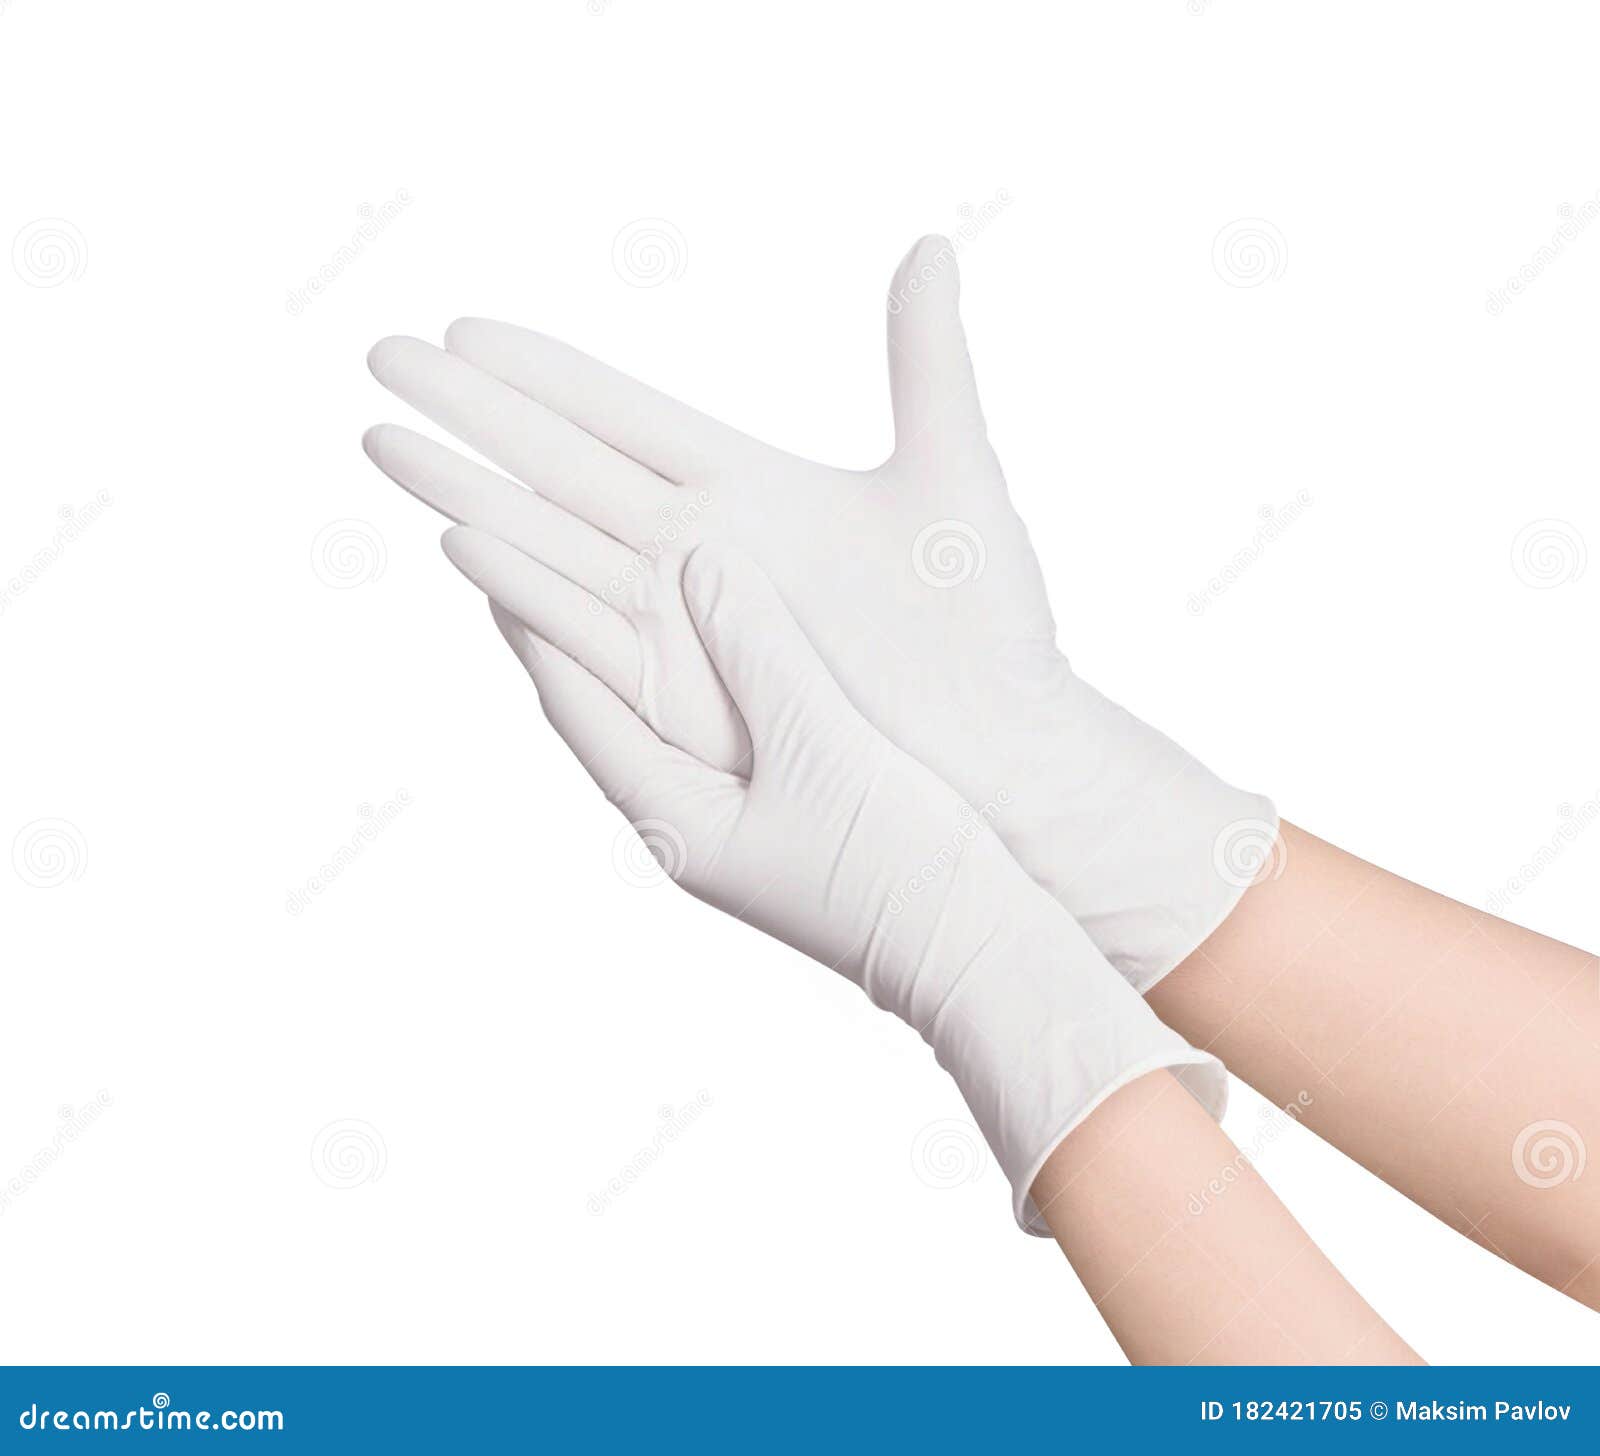 two white surgical medical gloves  on white background with hands. rubber glove manufacturing, human hand is wearing